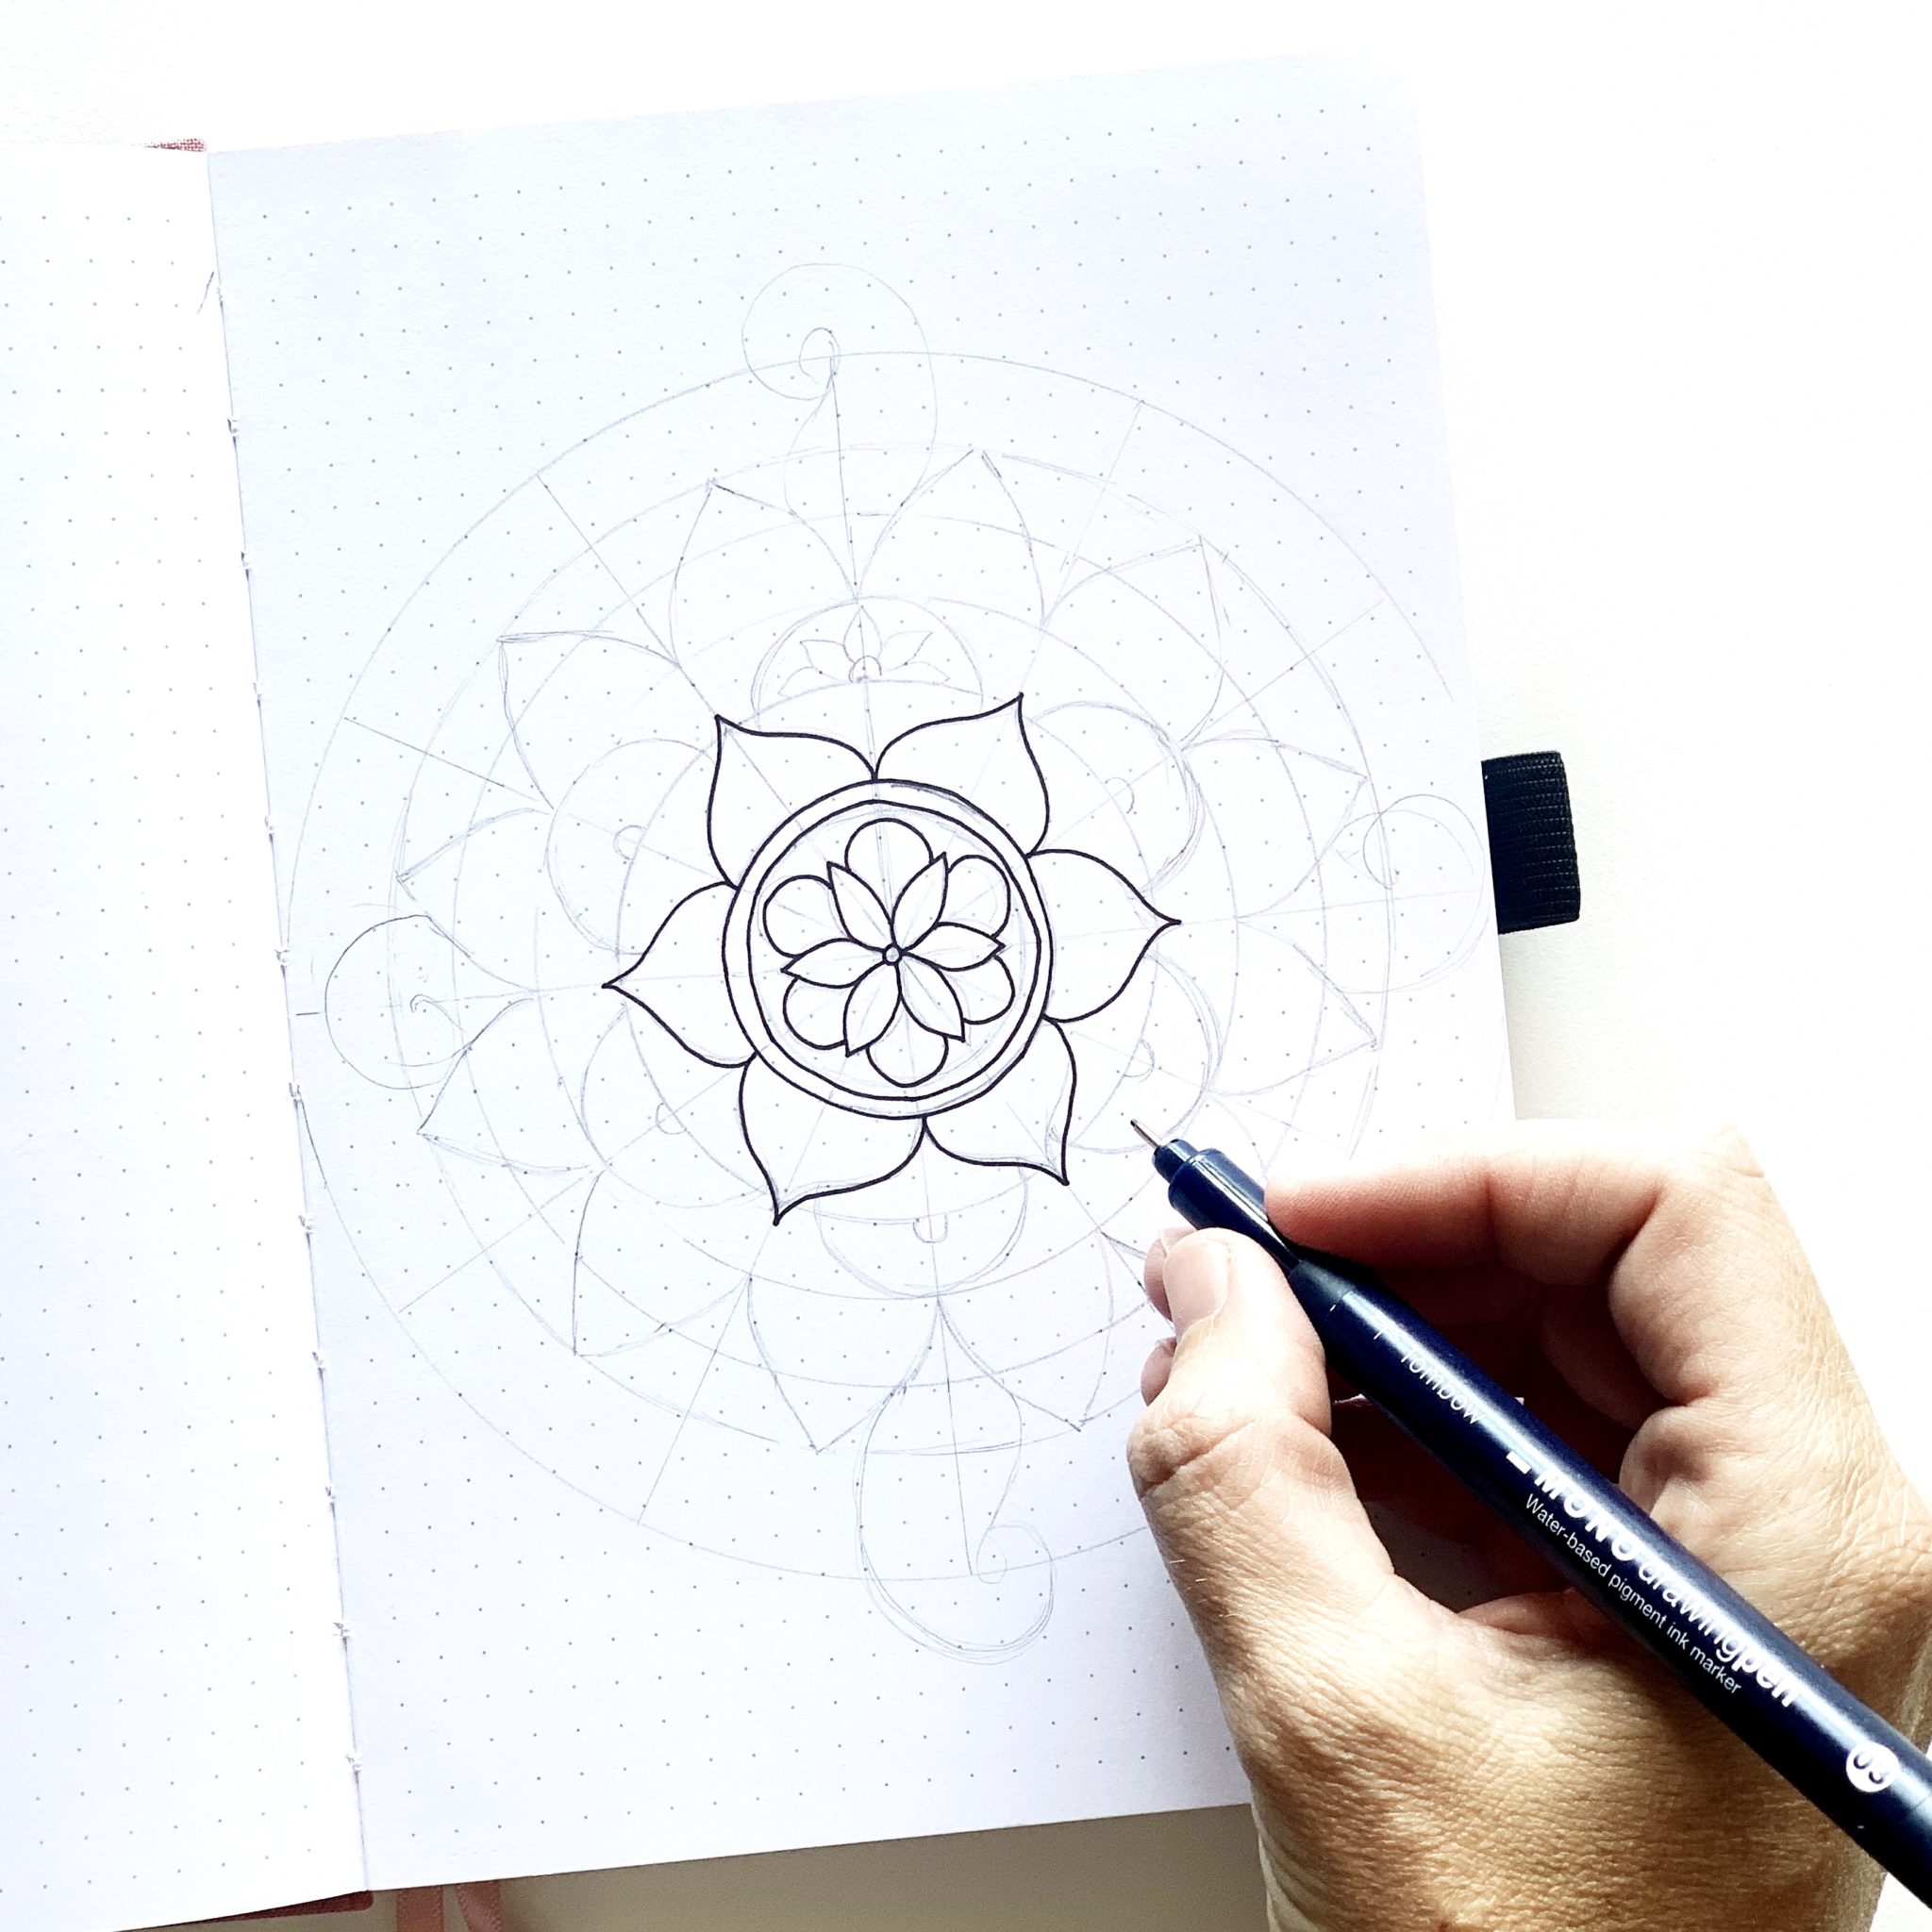 How To Draw Easy Mandala For Beginners, HOW TO Make the SIMPLE MANDALA